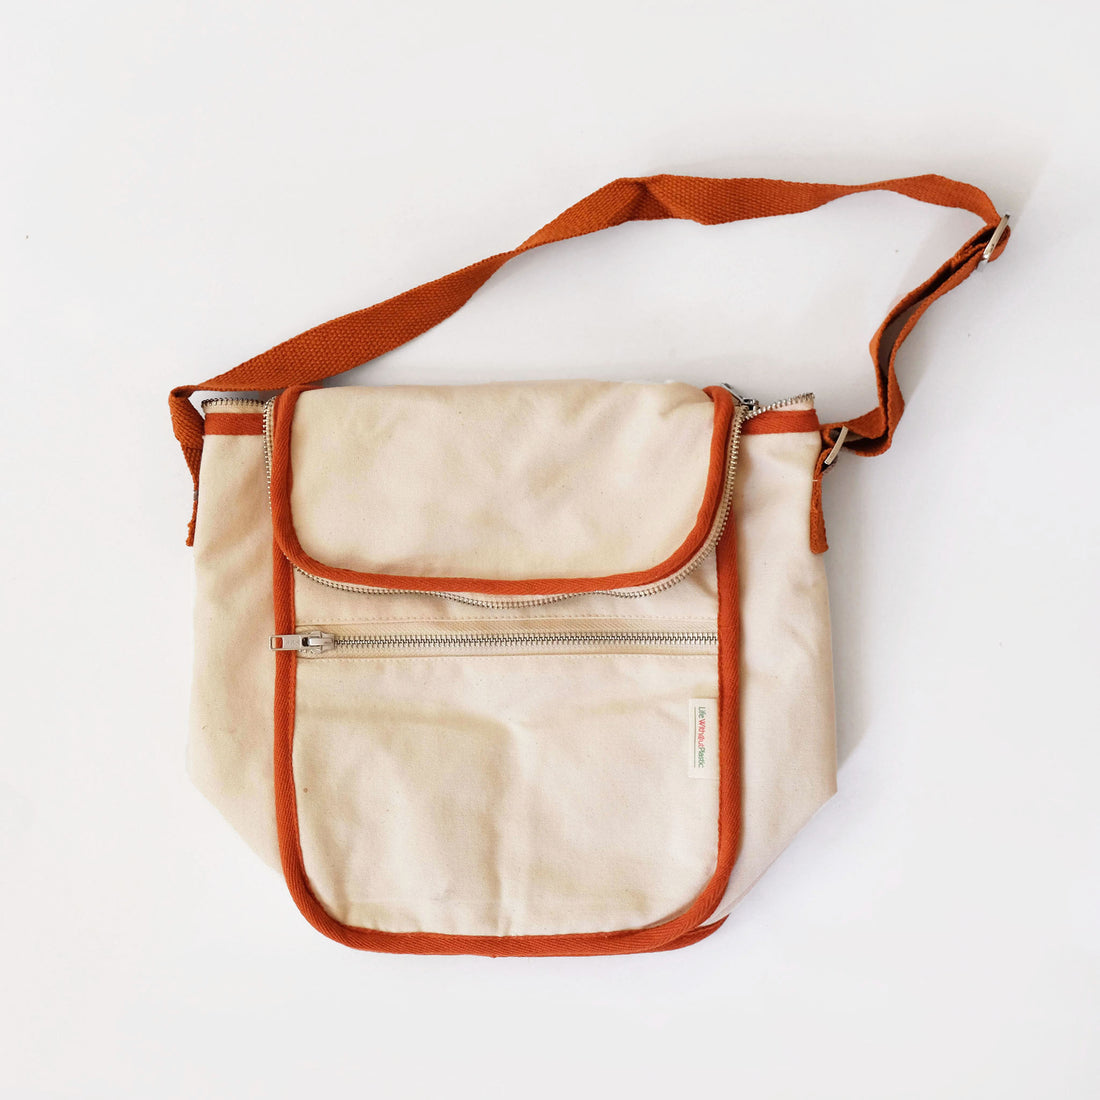 Plastic-Free Wool Insulated Natural Lunch Bag